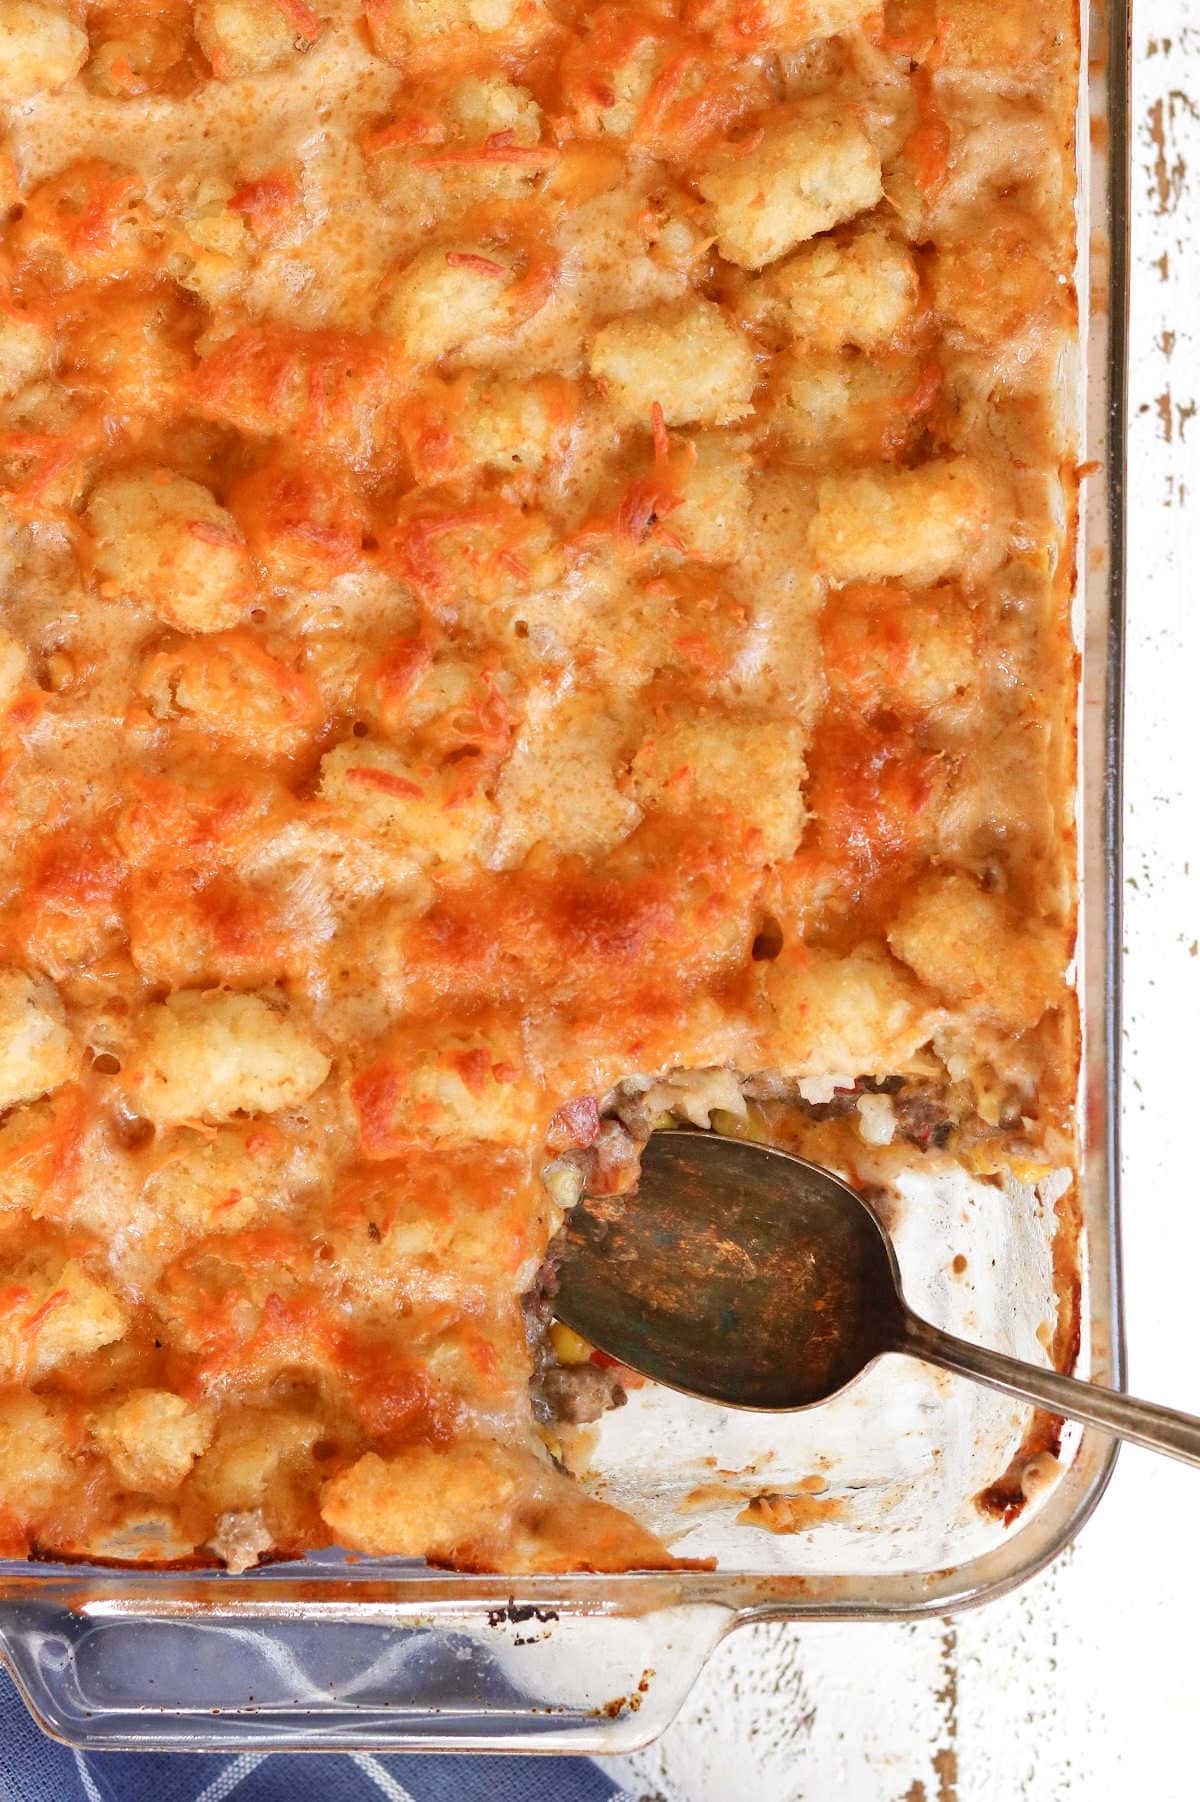 Overhead view of Cowboy Tater Tot Casserole with a serving removed showing the creamy interior of the dish.